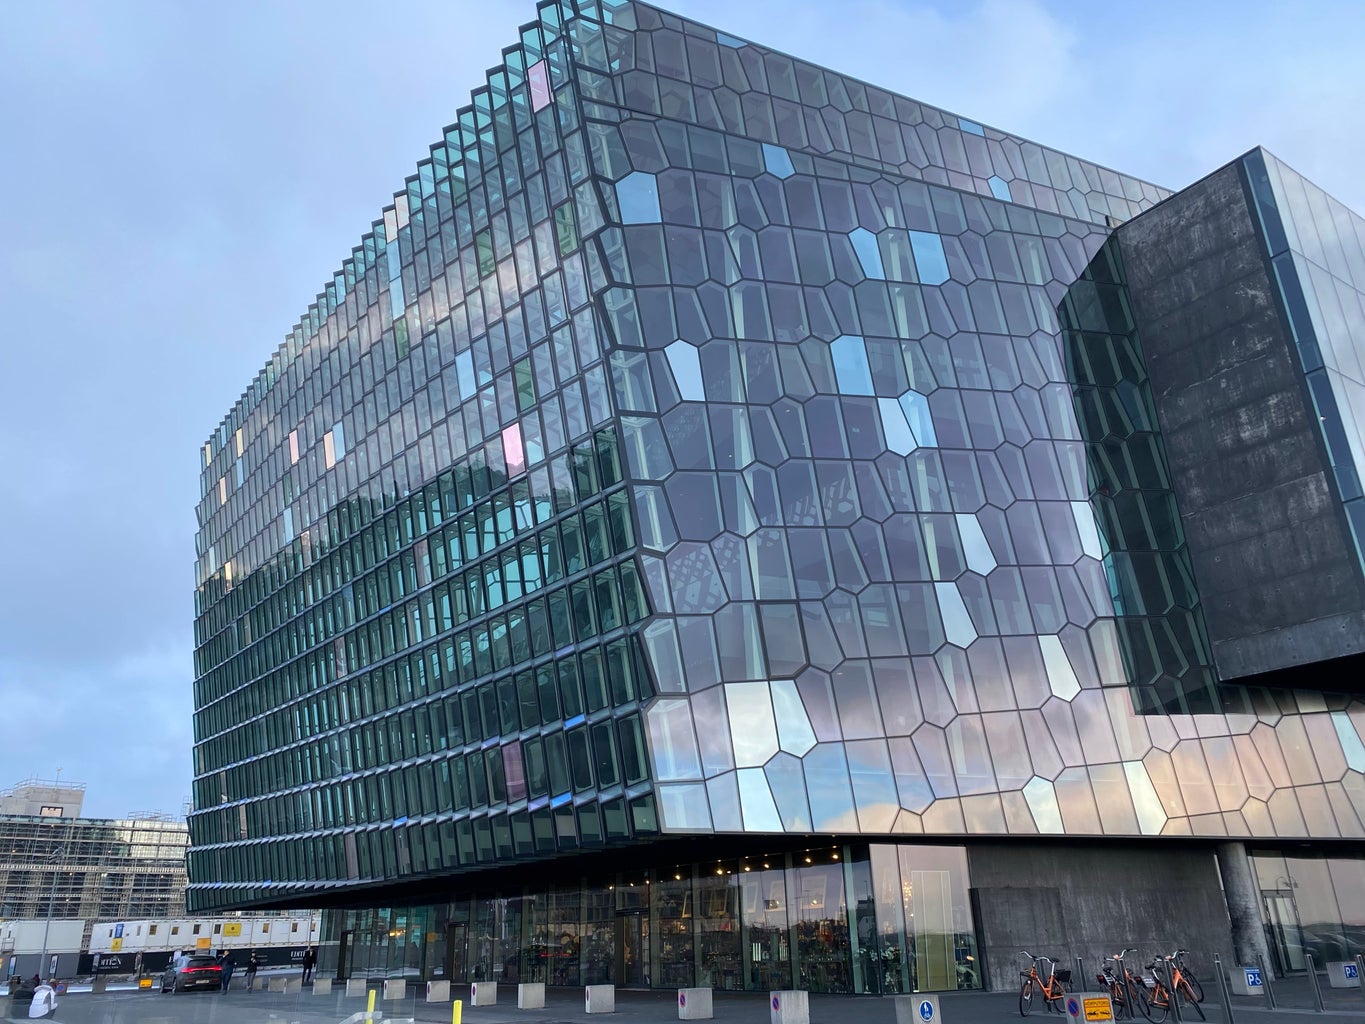 Outside the Harpa Concert Hall